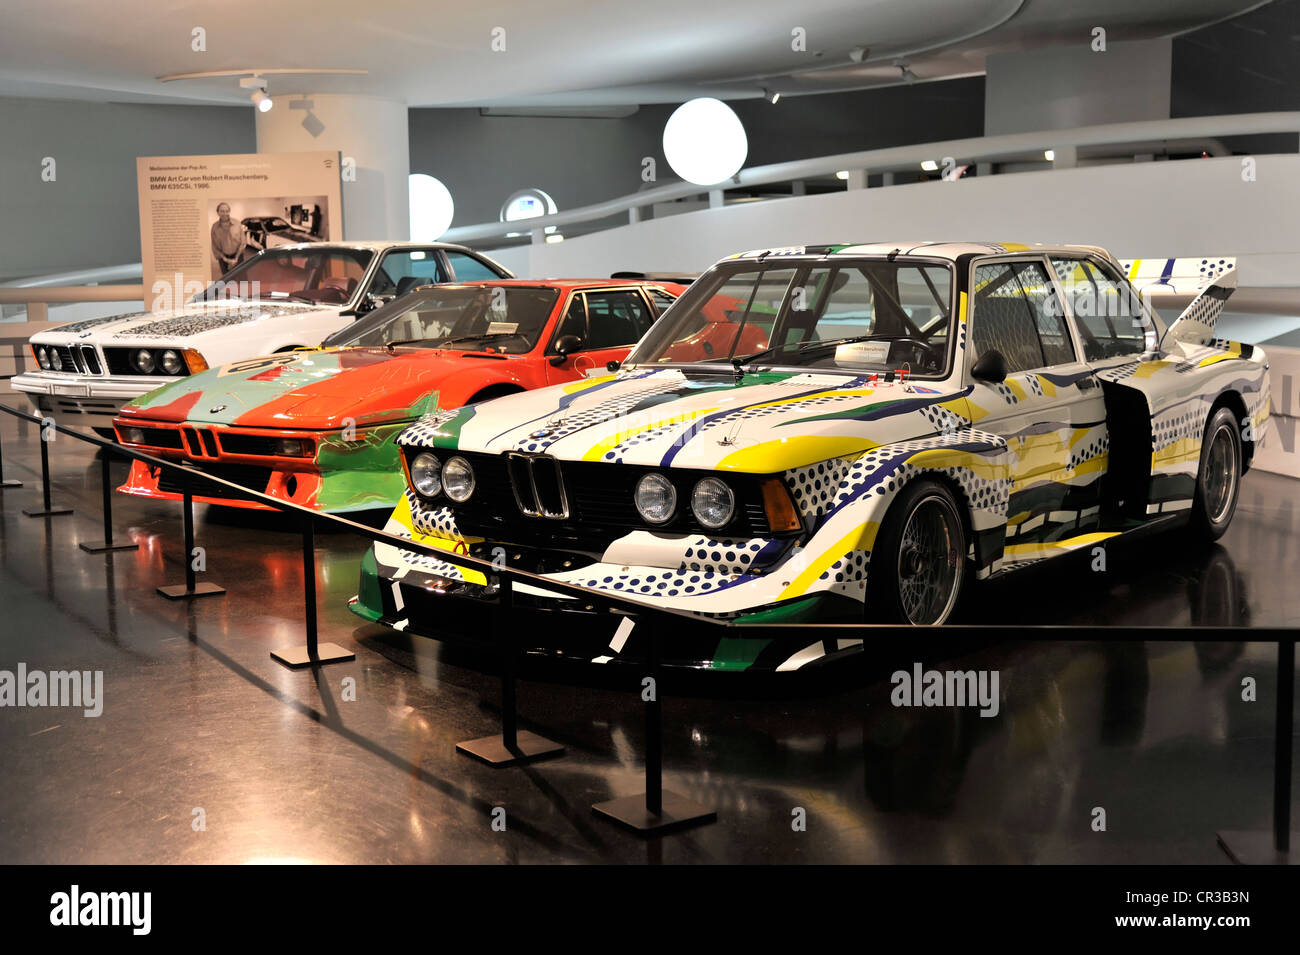 BMW Art Cars, BMW 635CSi of 1986 by Robert Rauschenberg at the back, BMW M1 of 1979 by Andy Warhol in the middle and BMW 320i of Stock Photo